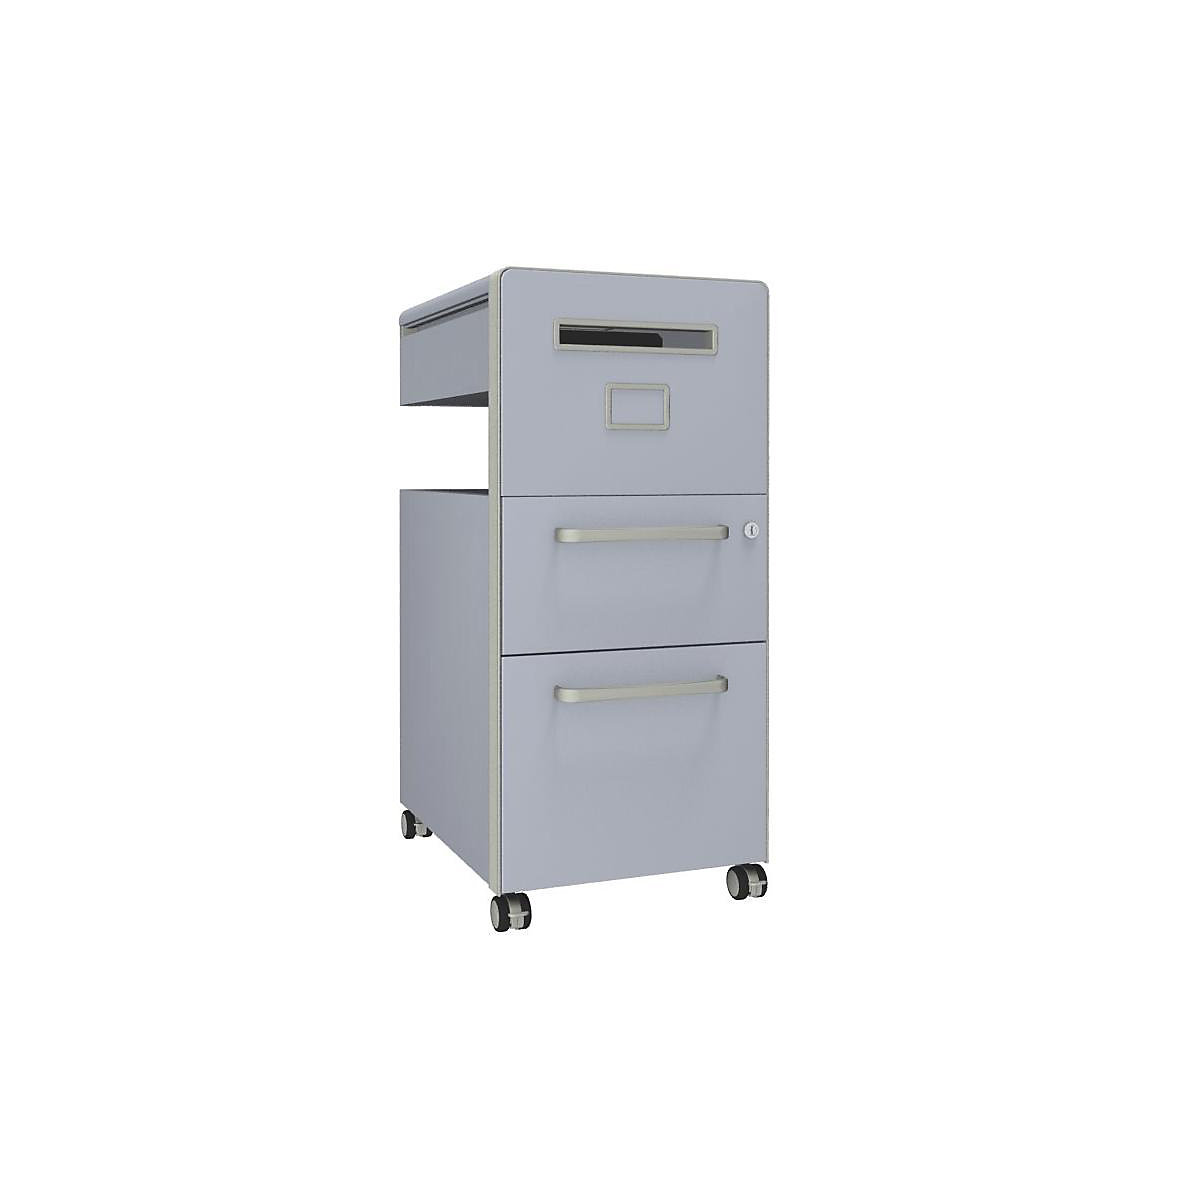 Bite™ pedestal furniture, with 1 whiteboard, opens on the right side – BISLEY, with 1 universal drawer, 1 suspension file drawer, alaska-13